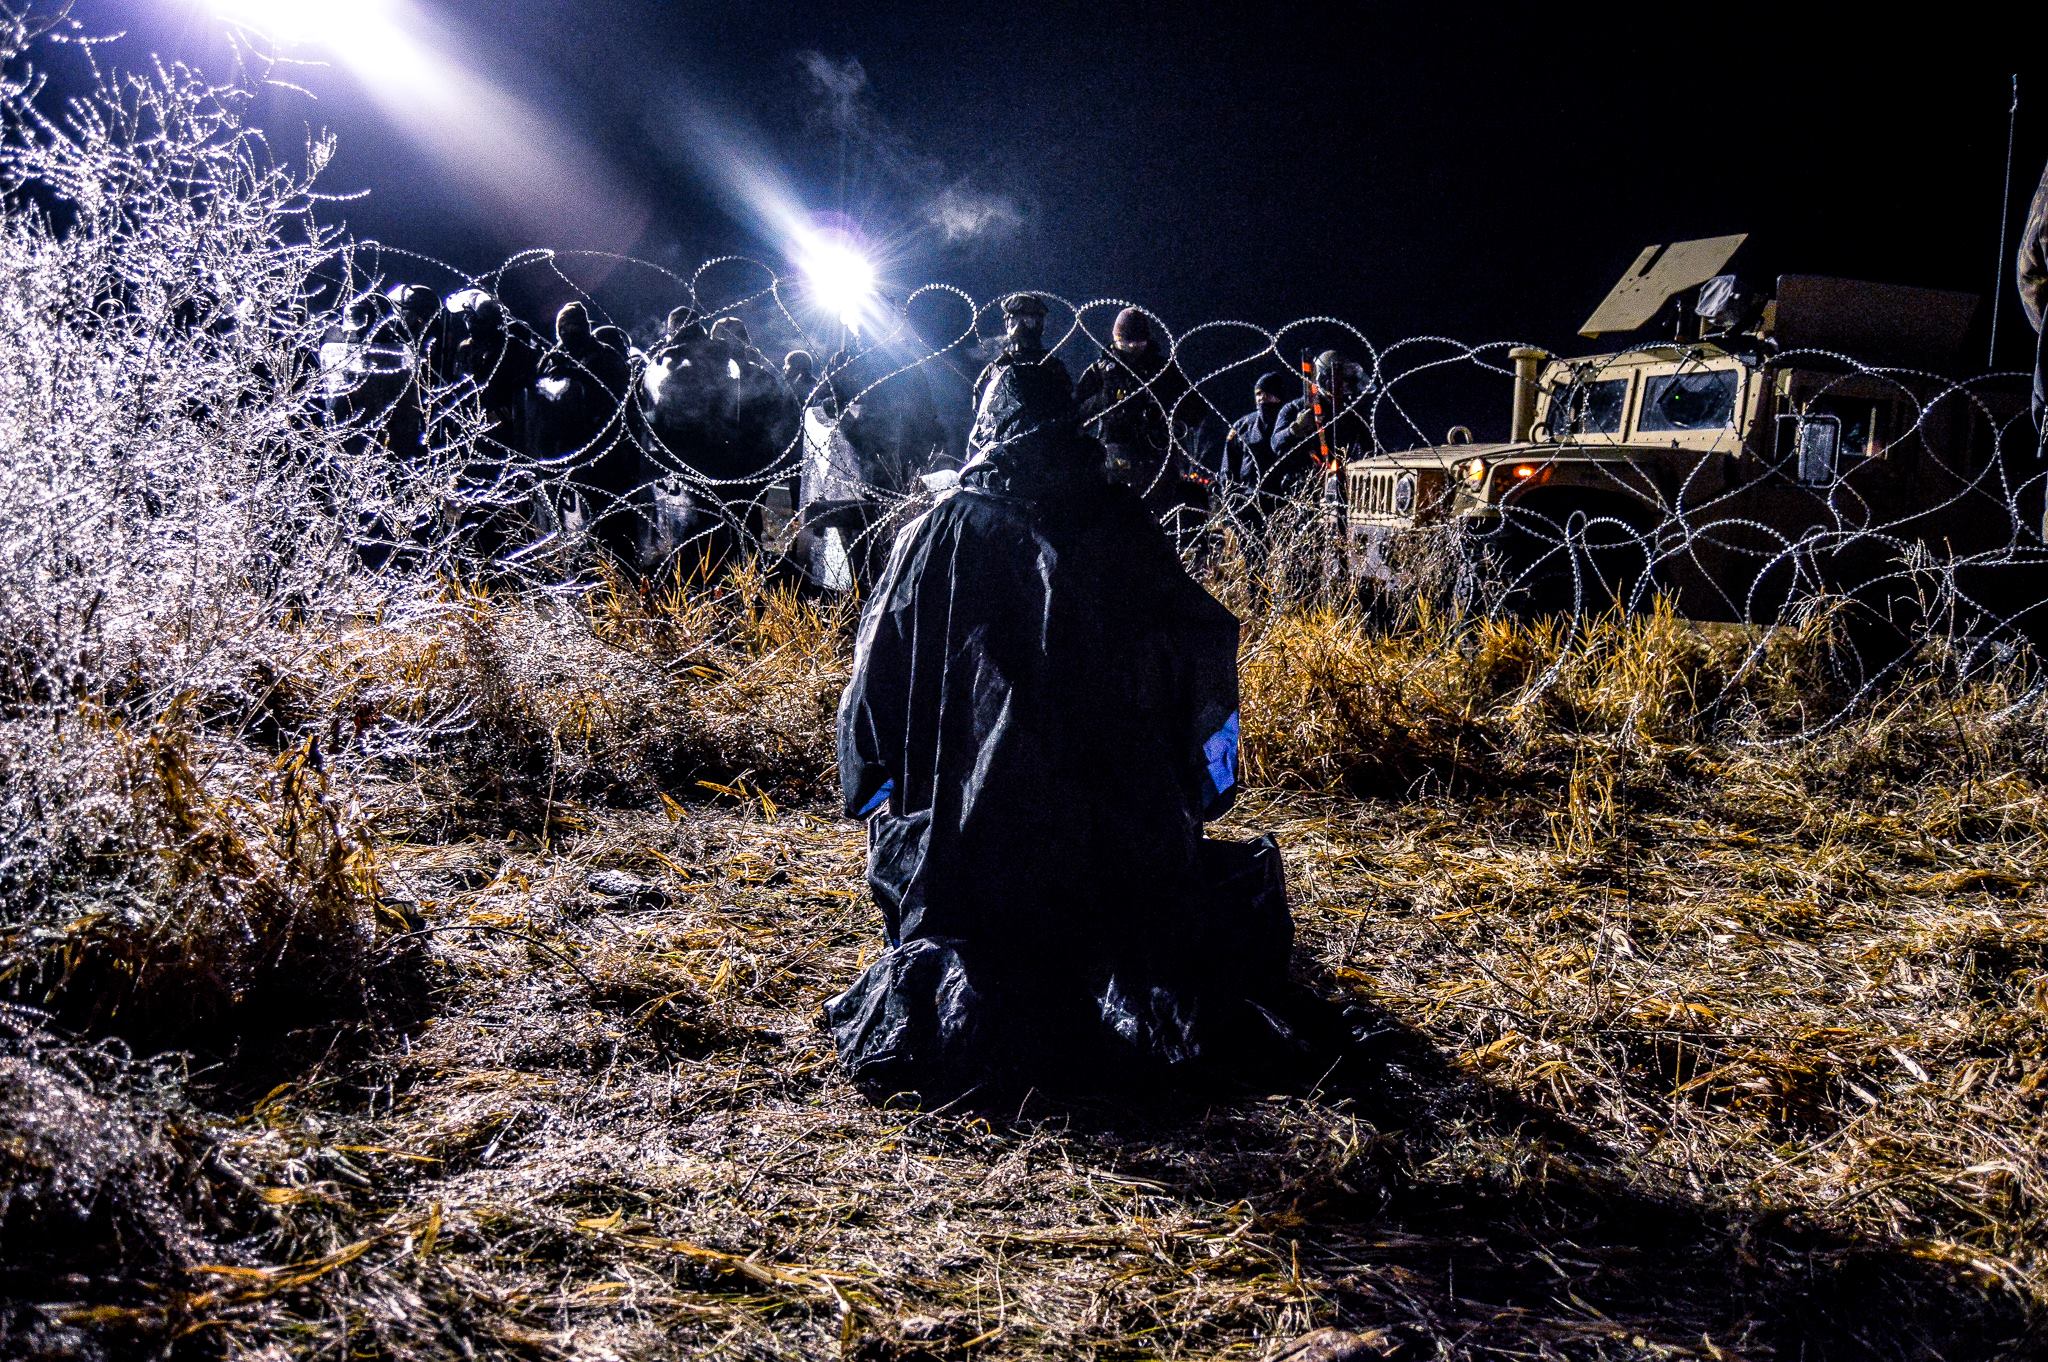 Ruth Hopkins: Americans left with $15M bill for Dakota Access Pipeline's 'private army'